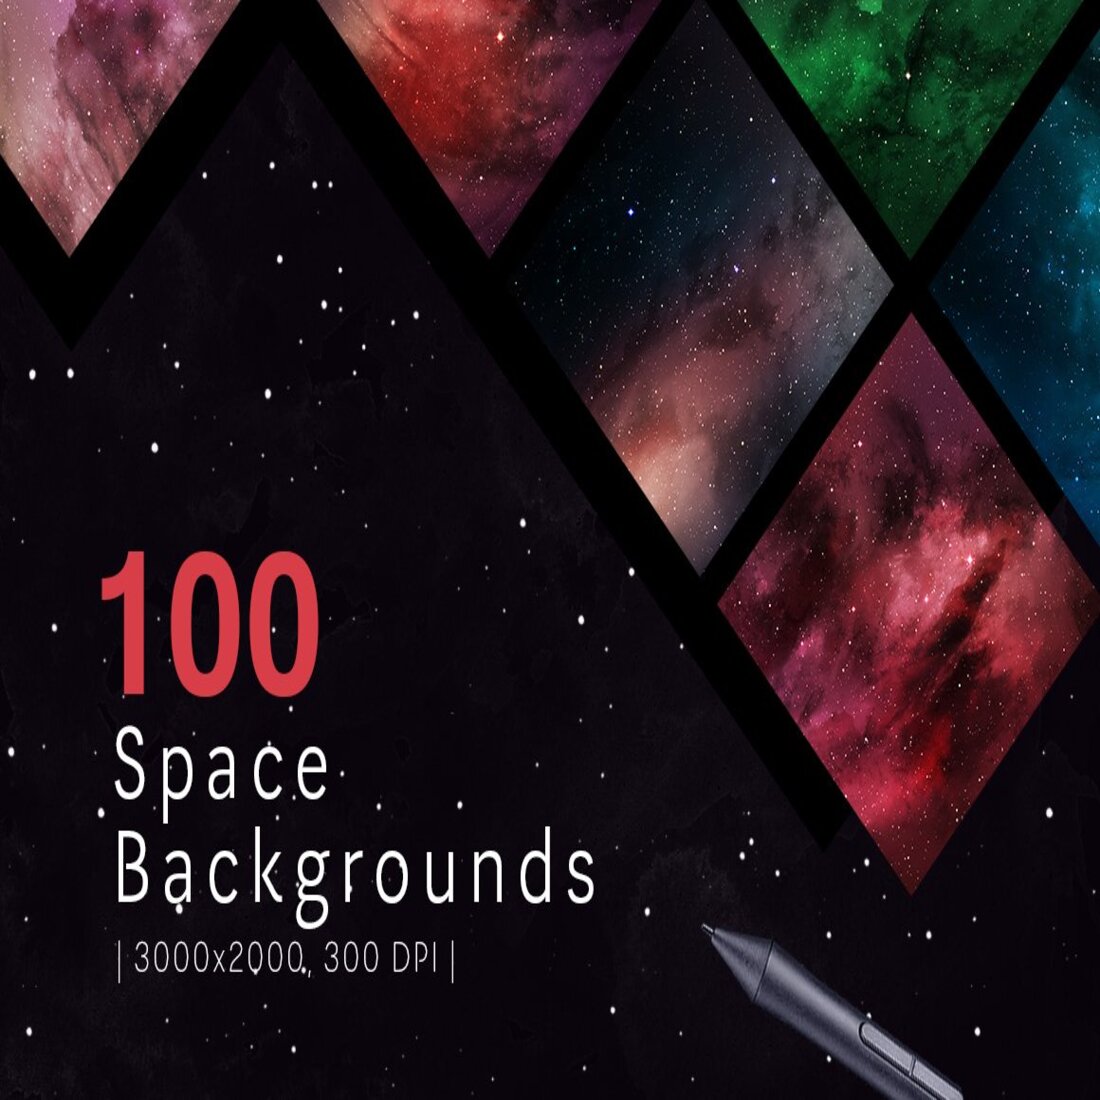 100 Space Backgrounds cover.